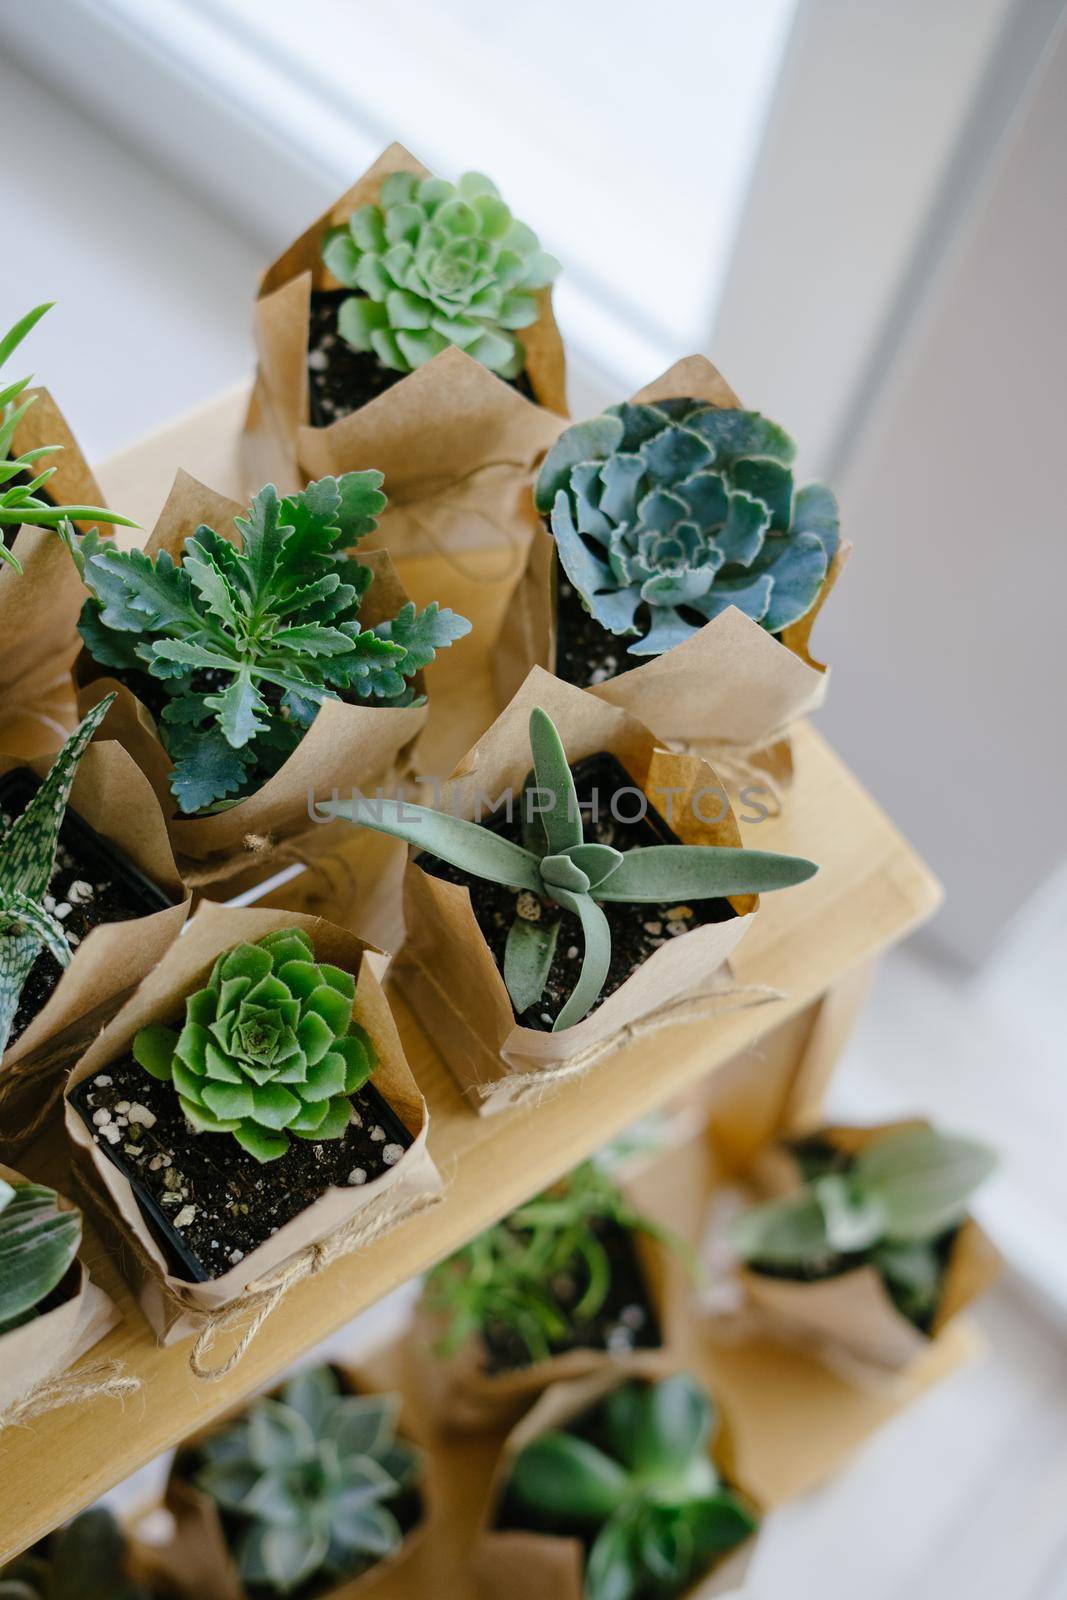 Sale of succulents and cacti. Eco package. Succulents are on a wooden shelf. Gifts for birthday, wedding, Father's Day, Mother's Day, International Women's Day. Indoor plant. Vertical photo.